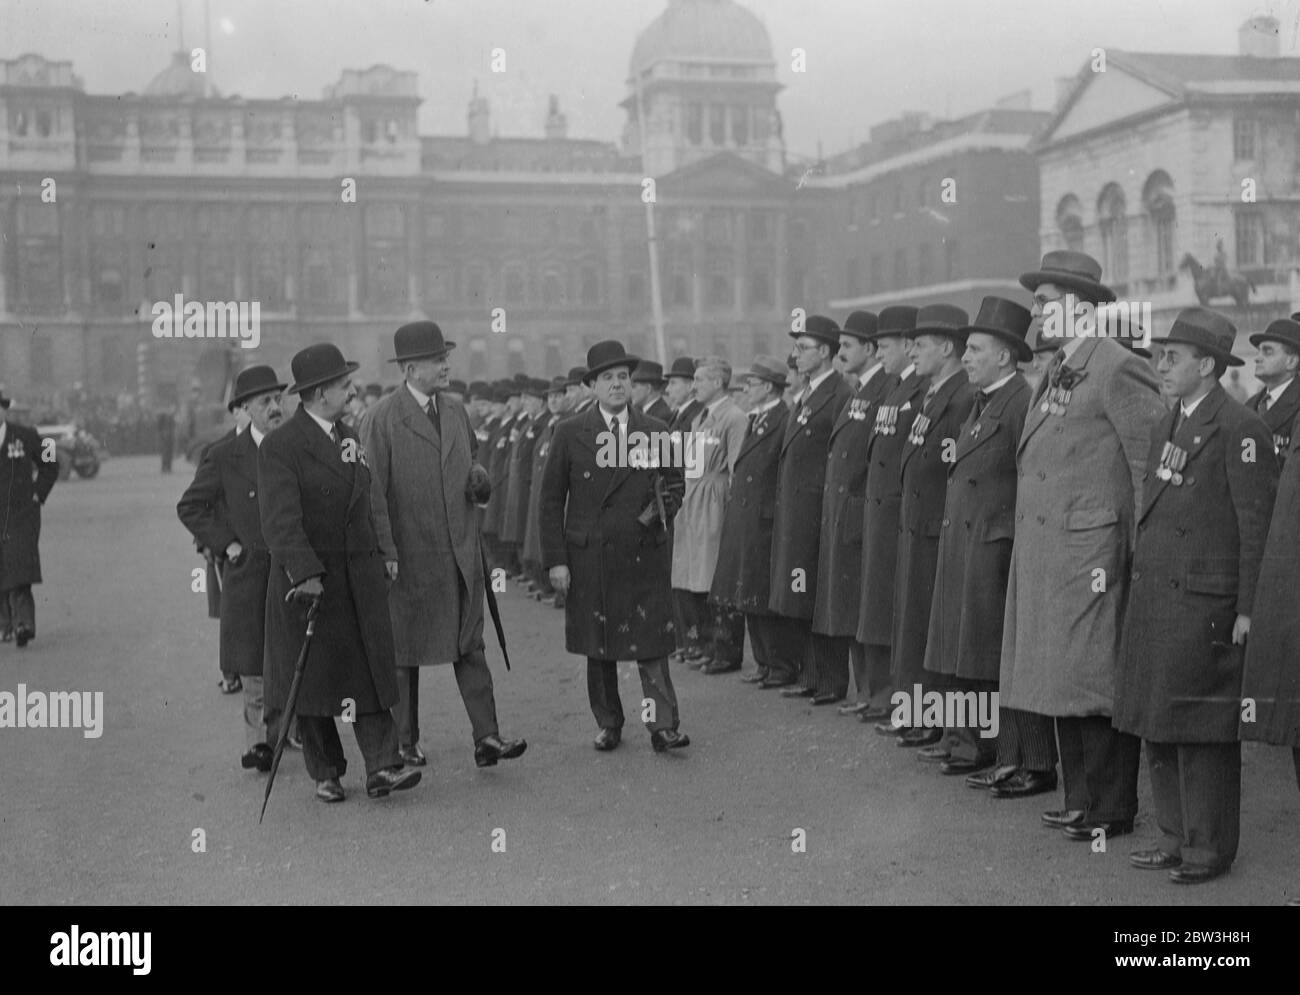 Jewish ex servicemen ' s armistice service on Horse Guards parade . The Jewish ex servicemen ' s annual Armistice Service took place on the Horse Guards Parade , conducted by the Chief Rabbi of the British Empire , Dr J H Herts . Field Marshal Sir Archibald Montgomery Massingberd inspected the ex servicemen at the parade . Photo shows Field Marshal Sir Archibald Montgomery Massingberd inspecting Jewish Ex Servicemen at the parade . 10 November 1935 Stock Photo